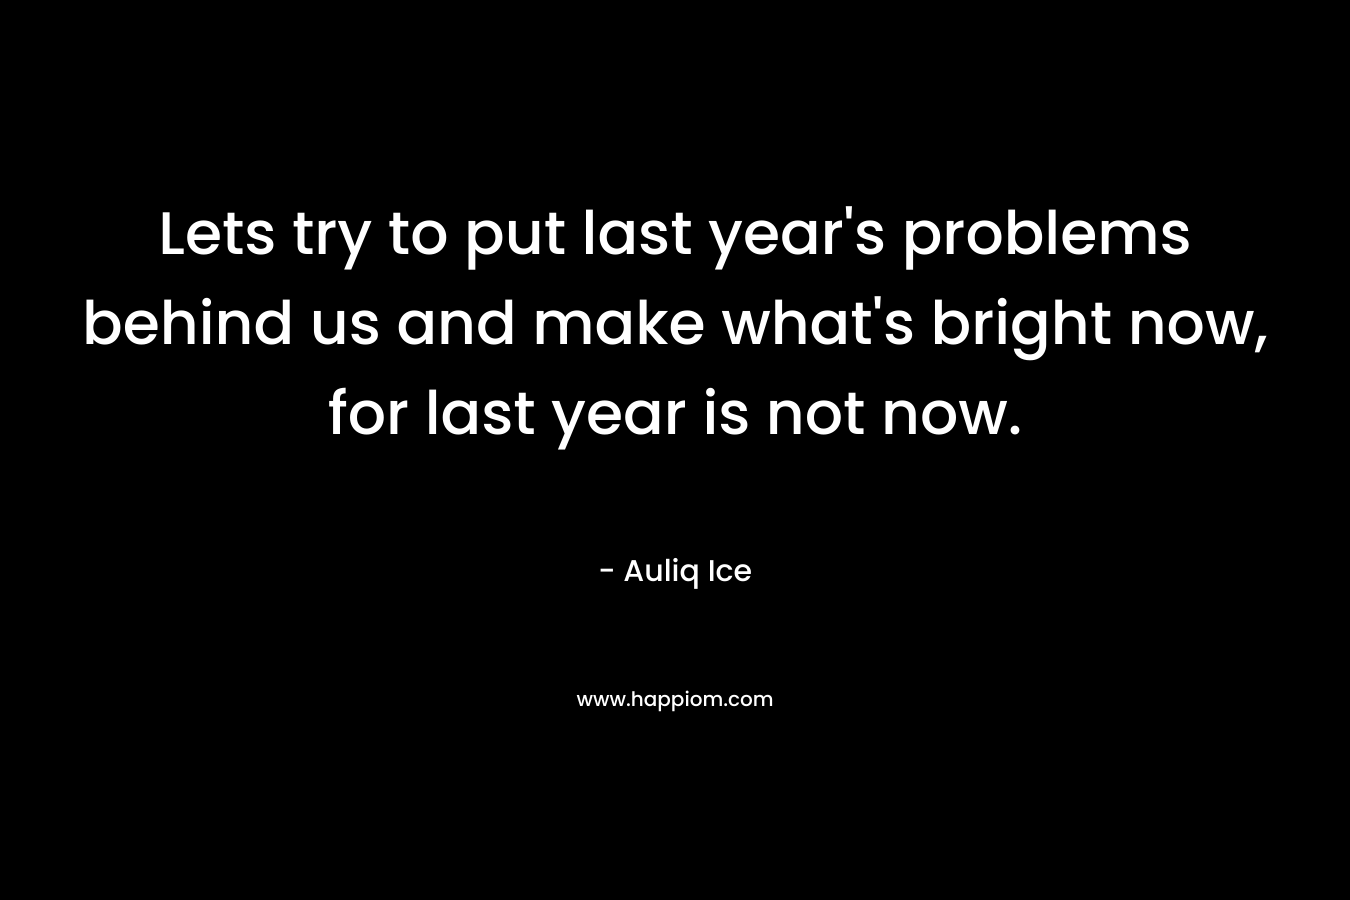 Lets try to put last year's problems behind us and make what's bright now, for last year is not now.